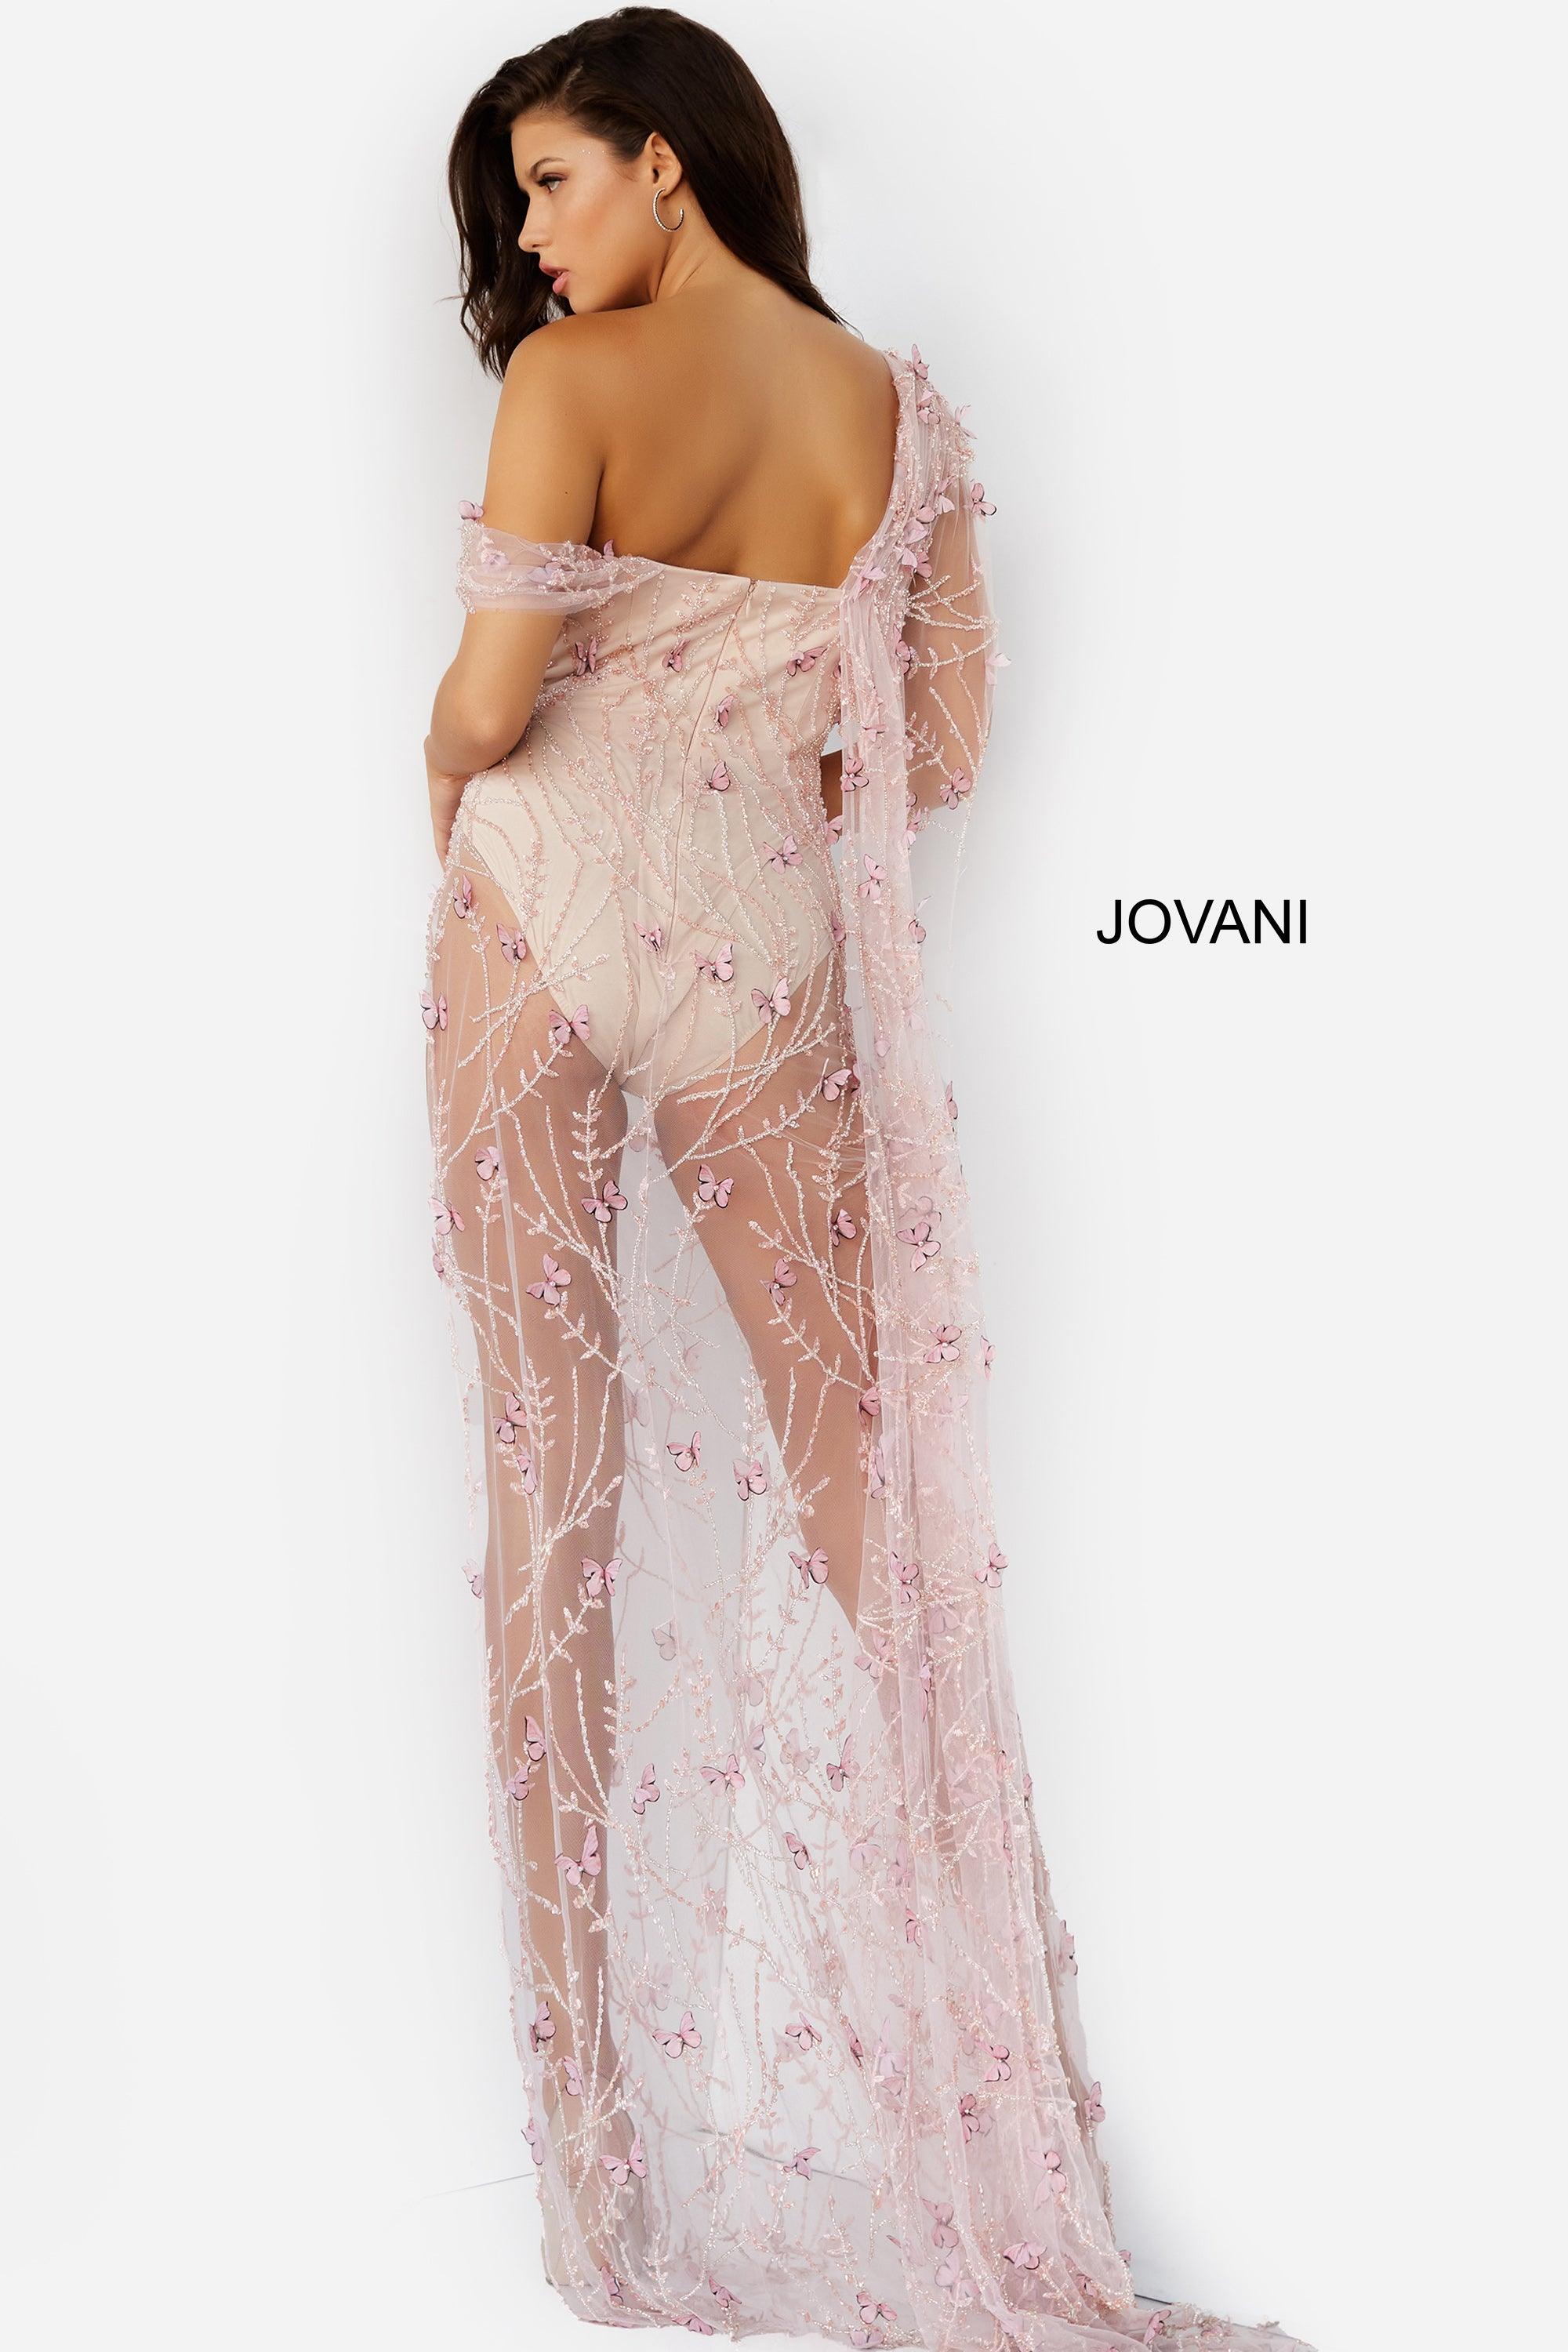 Jovani Long Formal Sexy Evening Prom Gown 06513 - The Dress Outlet